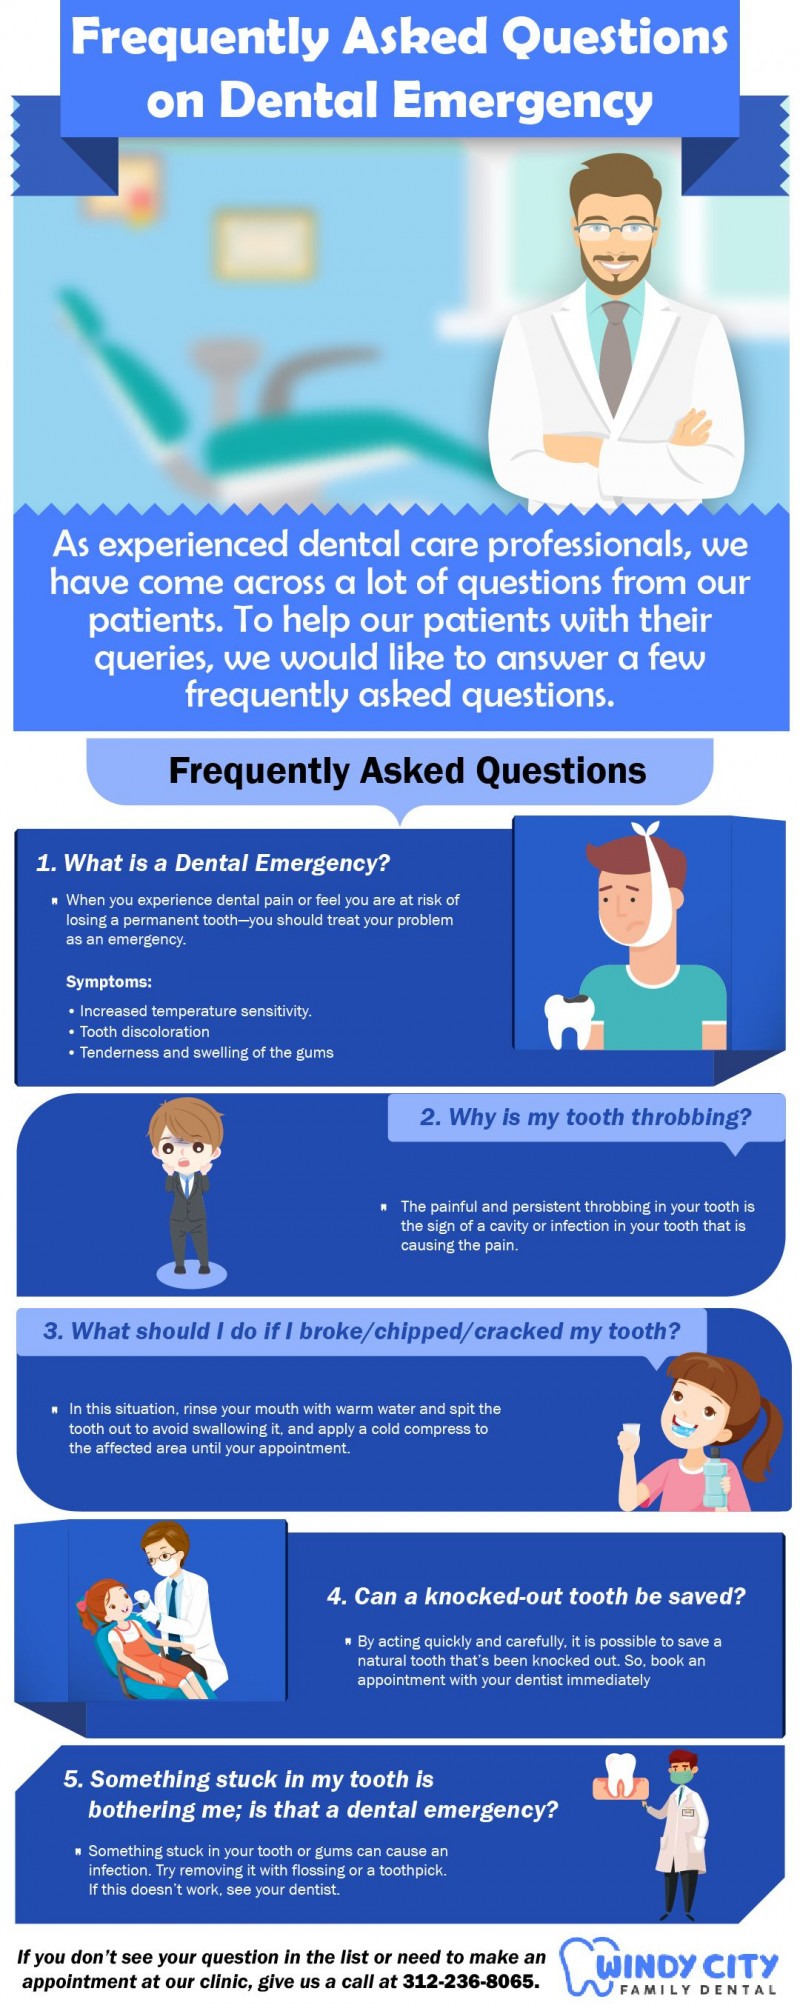 Frequently Asked Questions on Dental Emergency - Windy City Family Dental